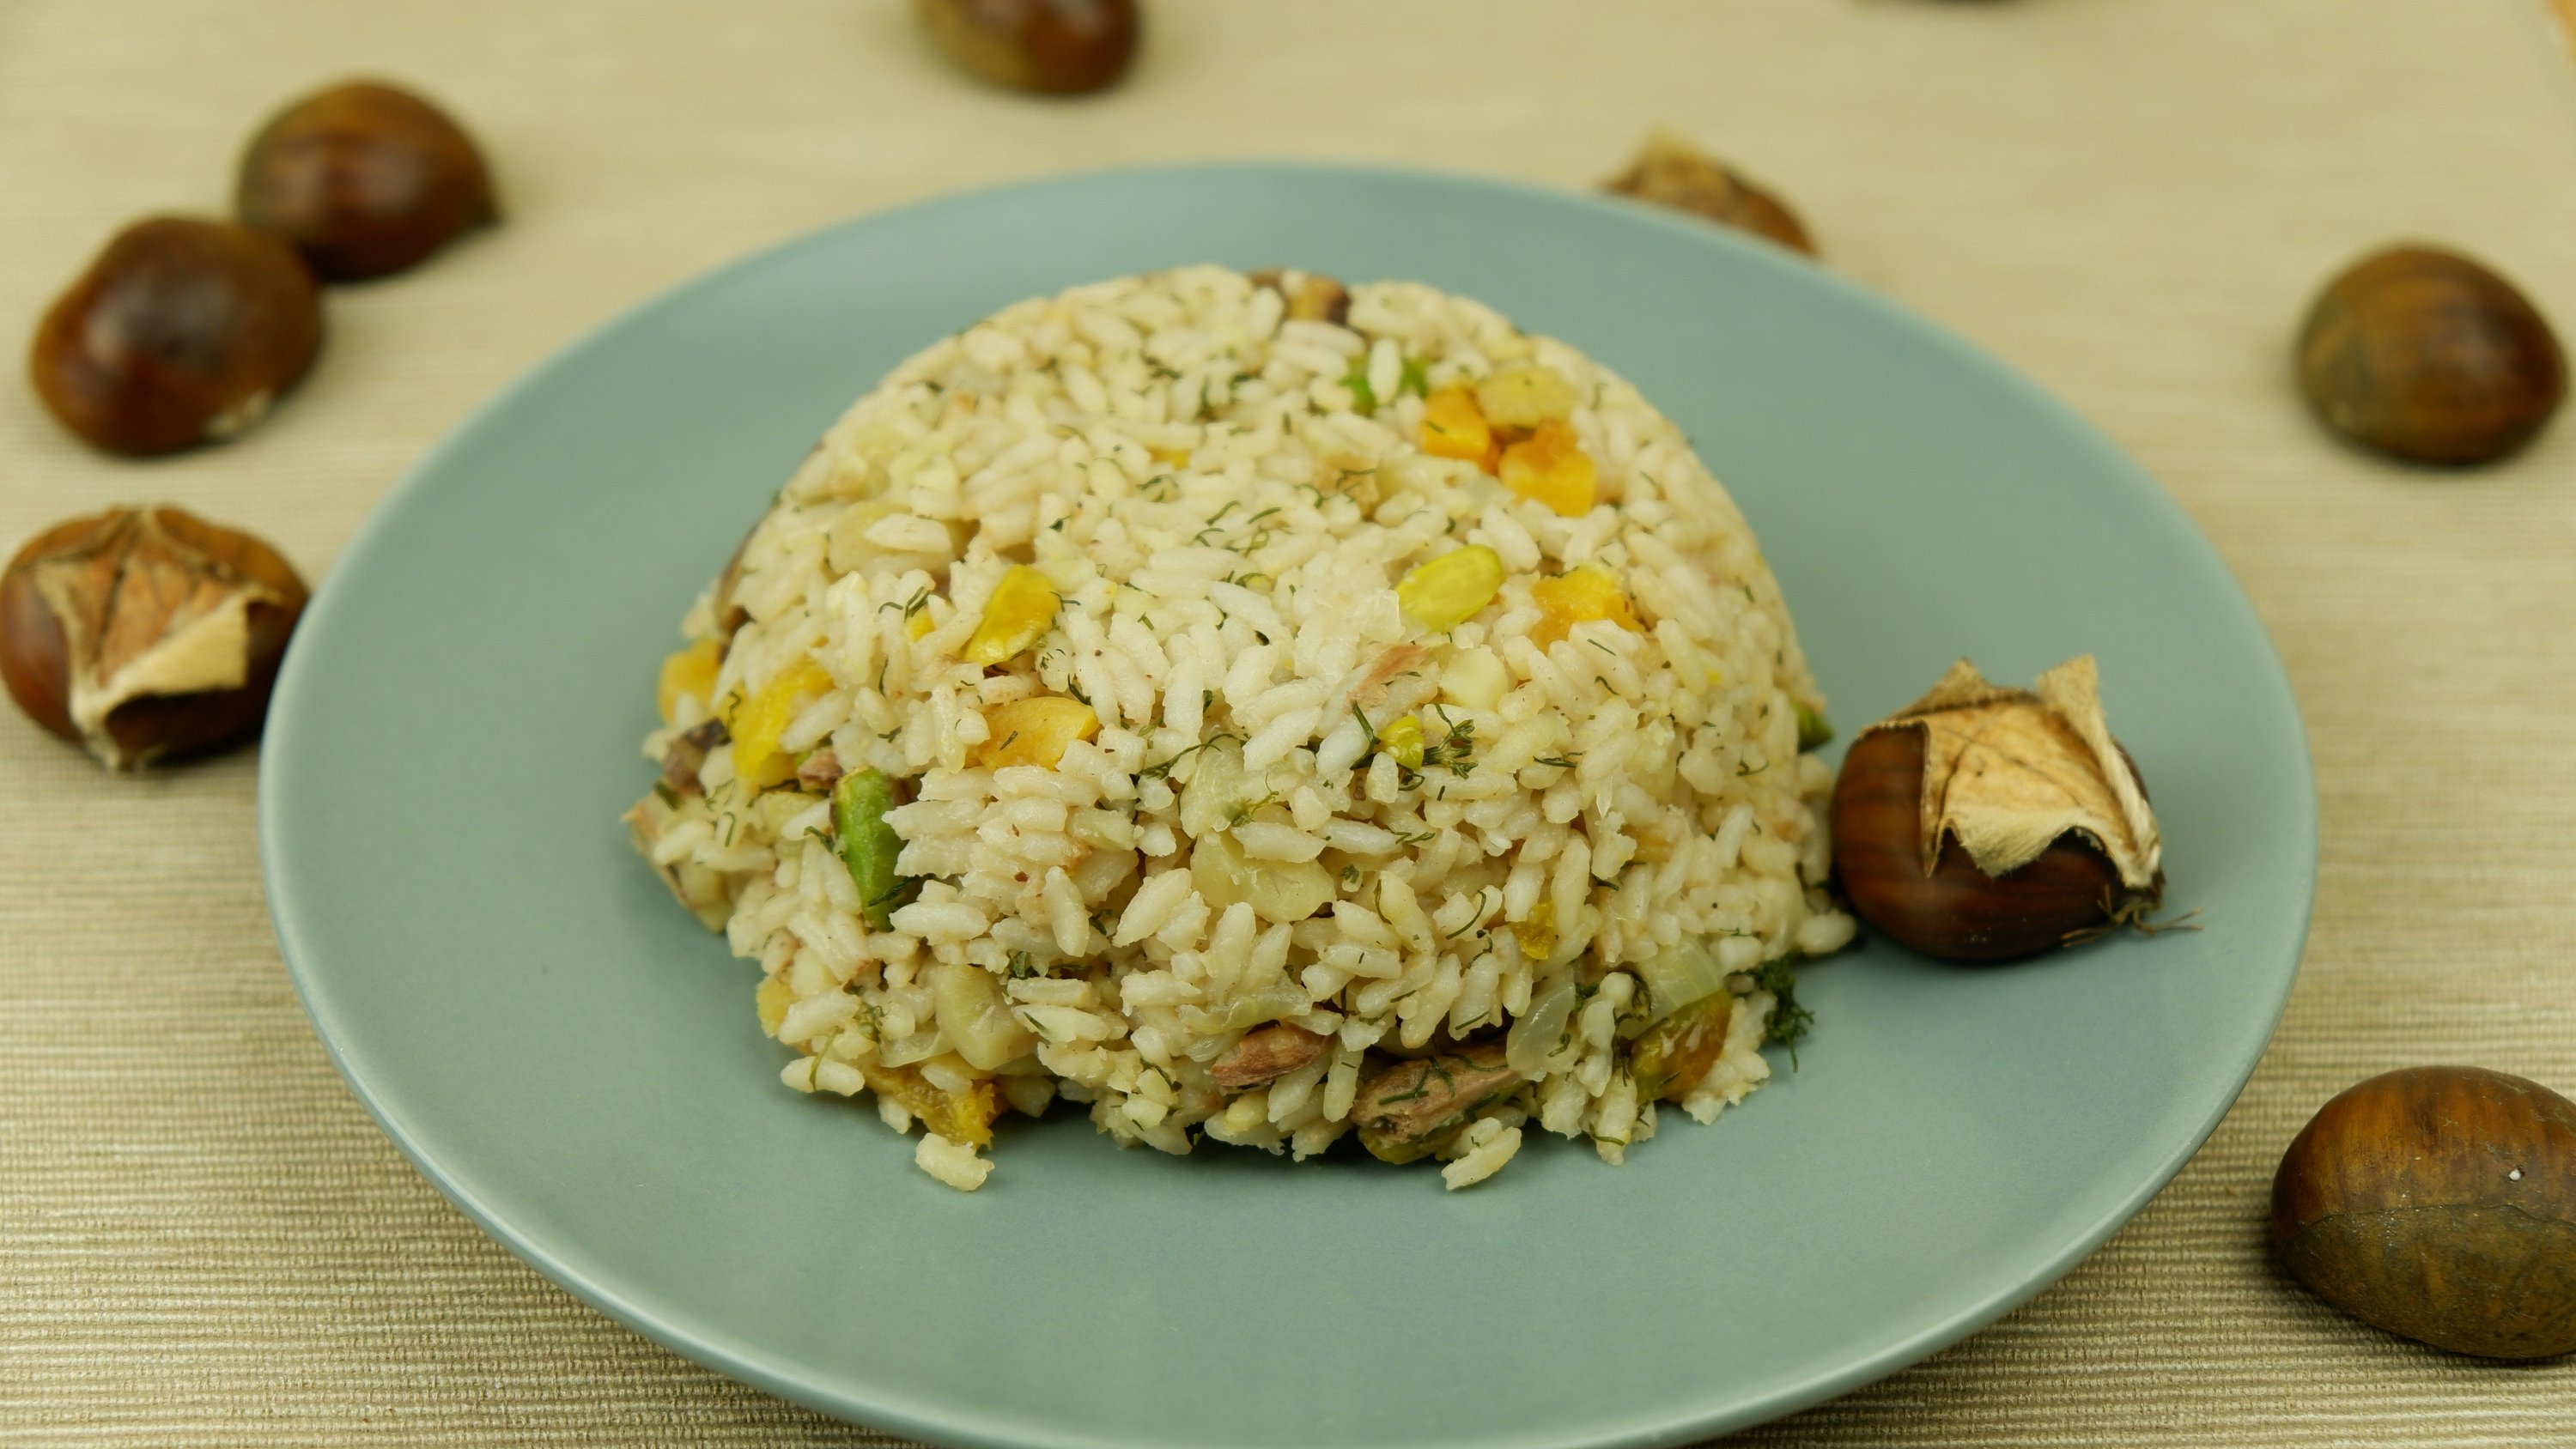 Flavorful chestnut rice is a great side for many meat dishes. (Photo by Ayla Coşkun)